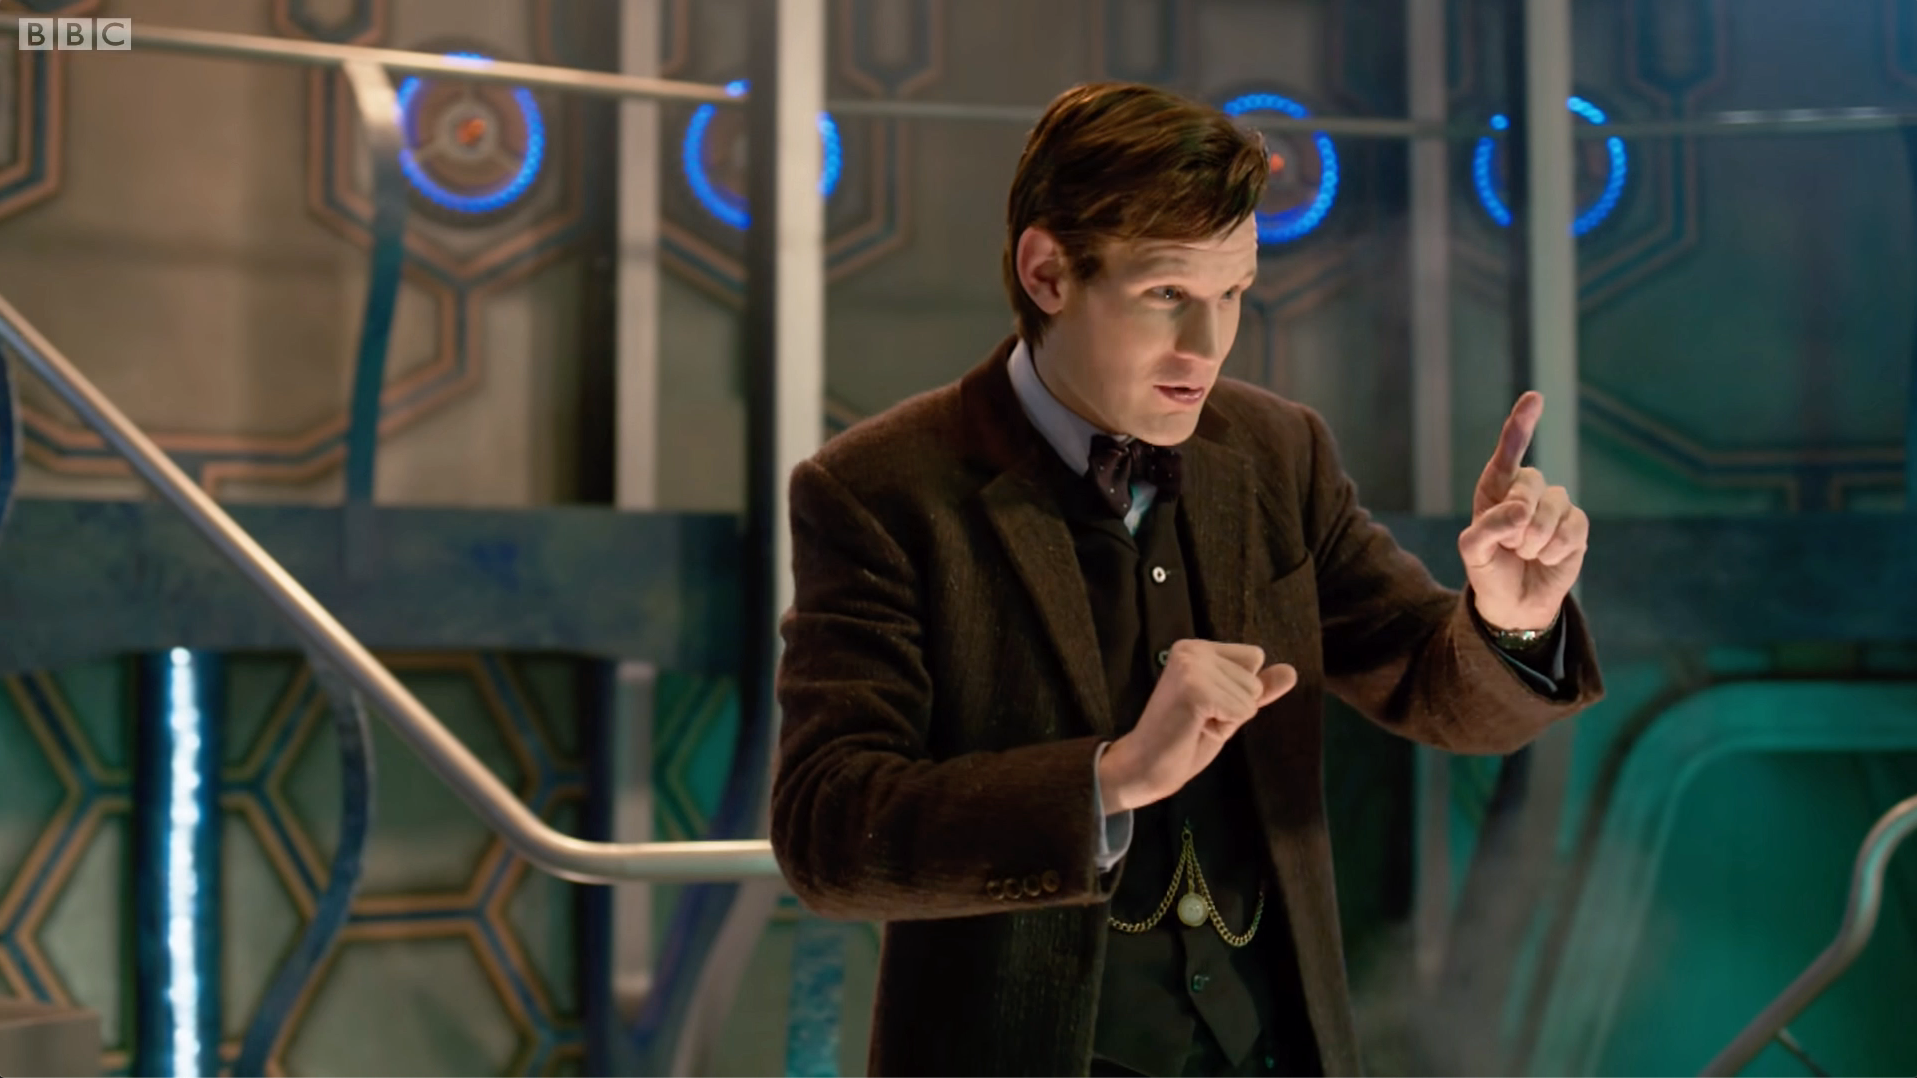 The Eleventh Doctor getting ready to regenerate.